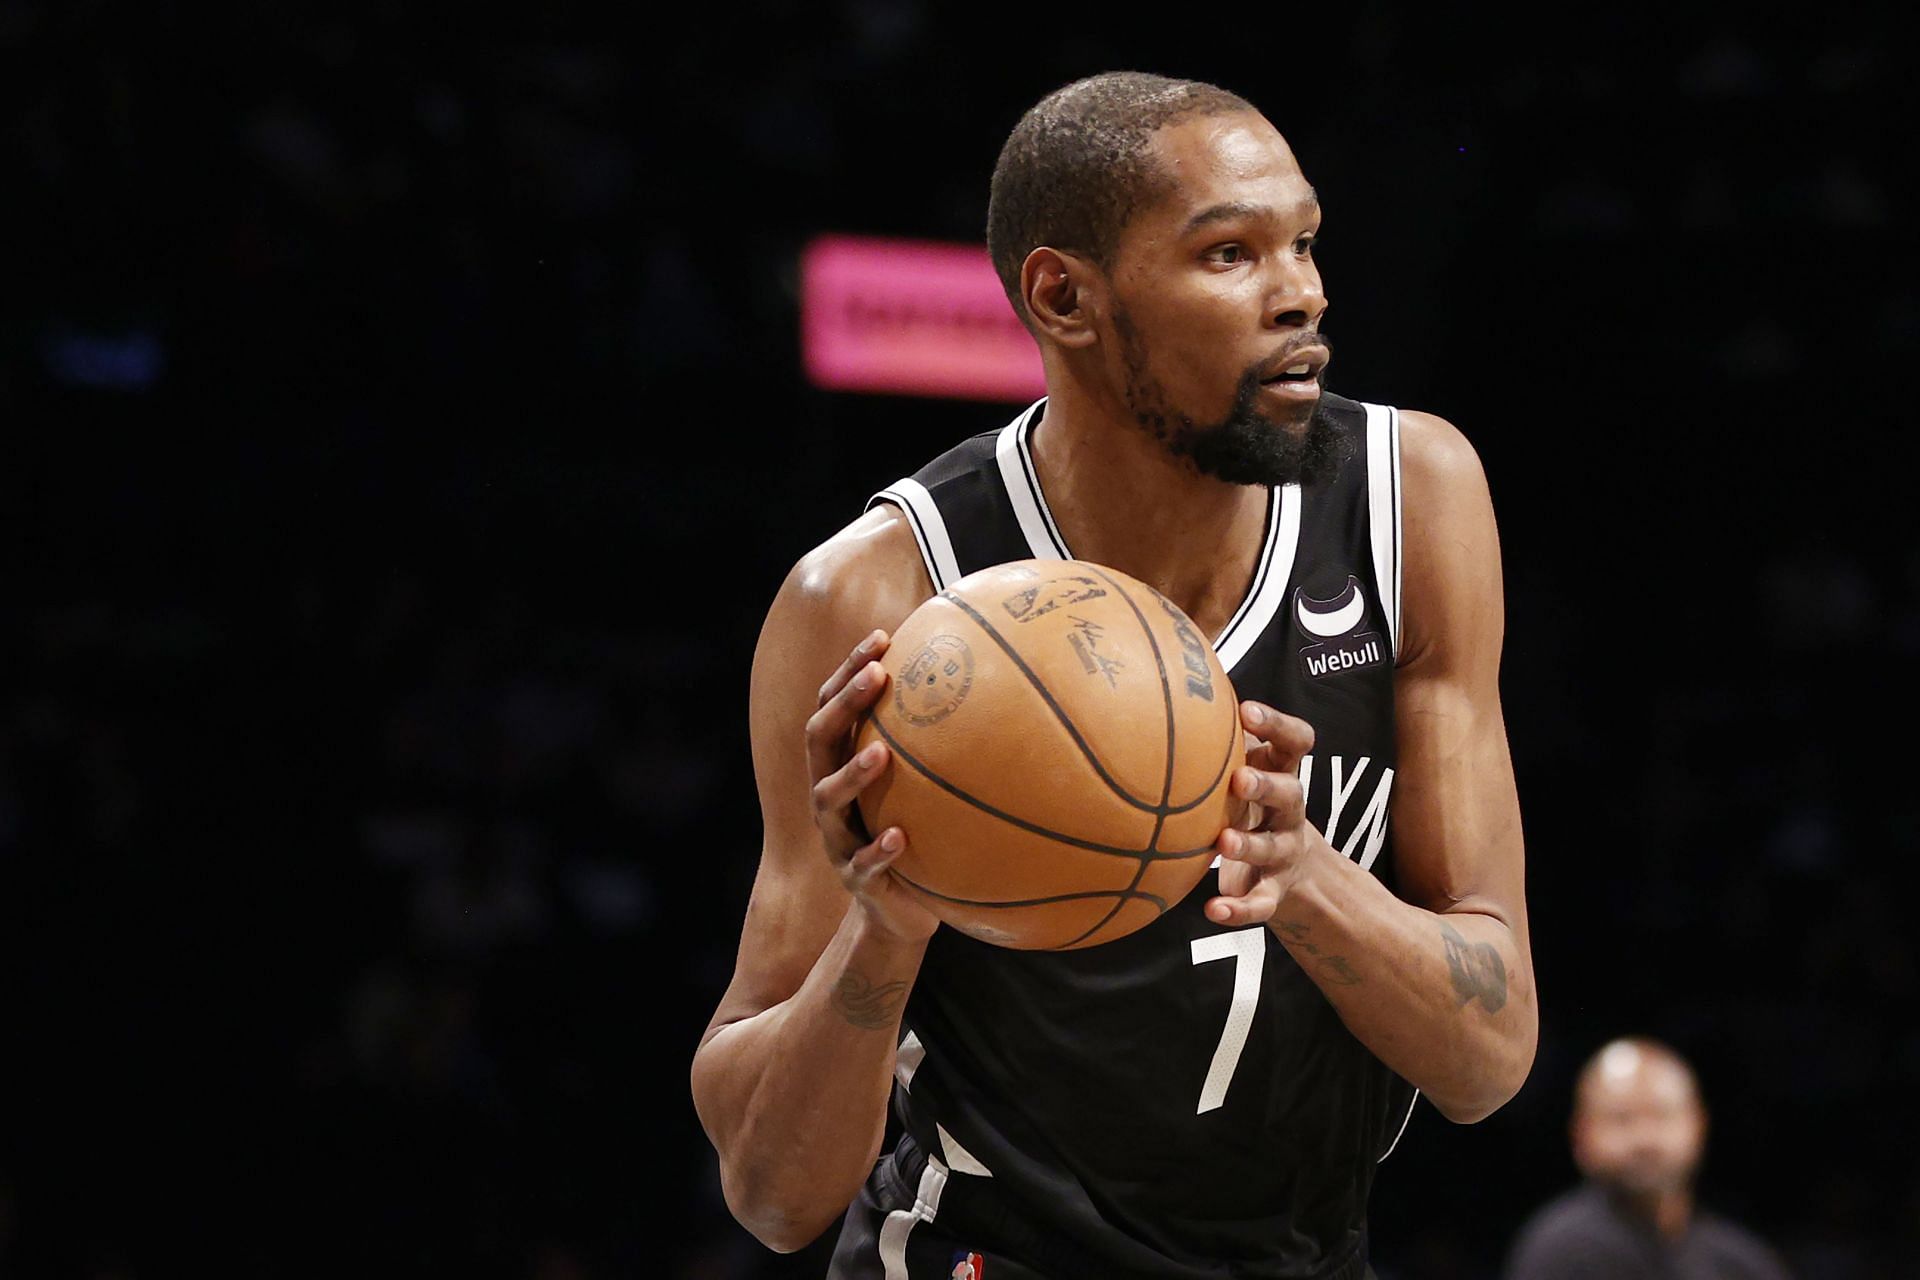 Kevin Durant #7 of the Brooklyn Nets looks to pass during the first half of the Eastern Conference 2022 Play-In Tournament against the Cleveland Cavaliers at Barclays Center on April 12, 2022, in the Brooklyn borough of New York City.